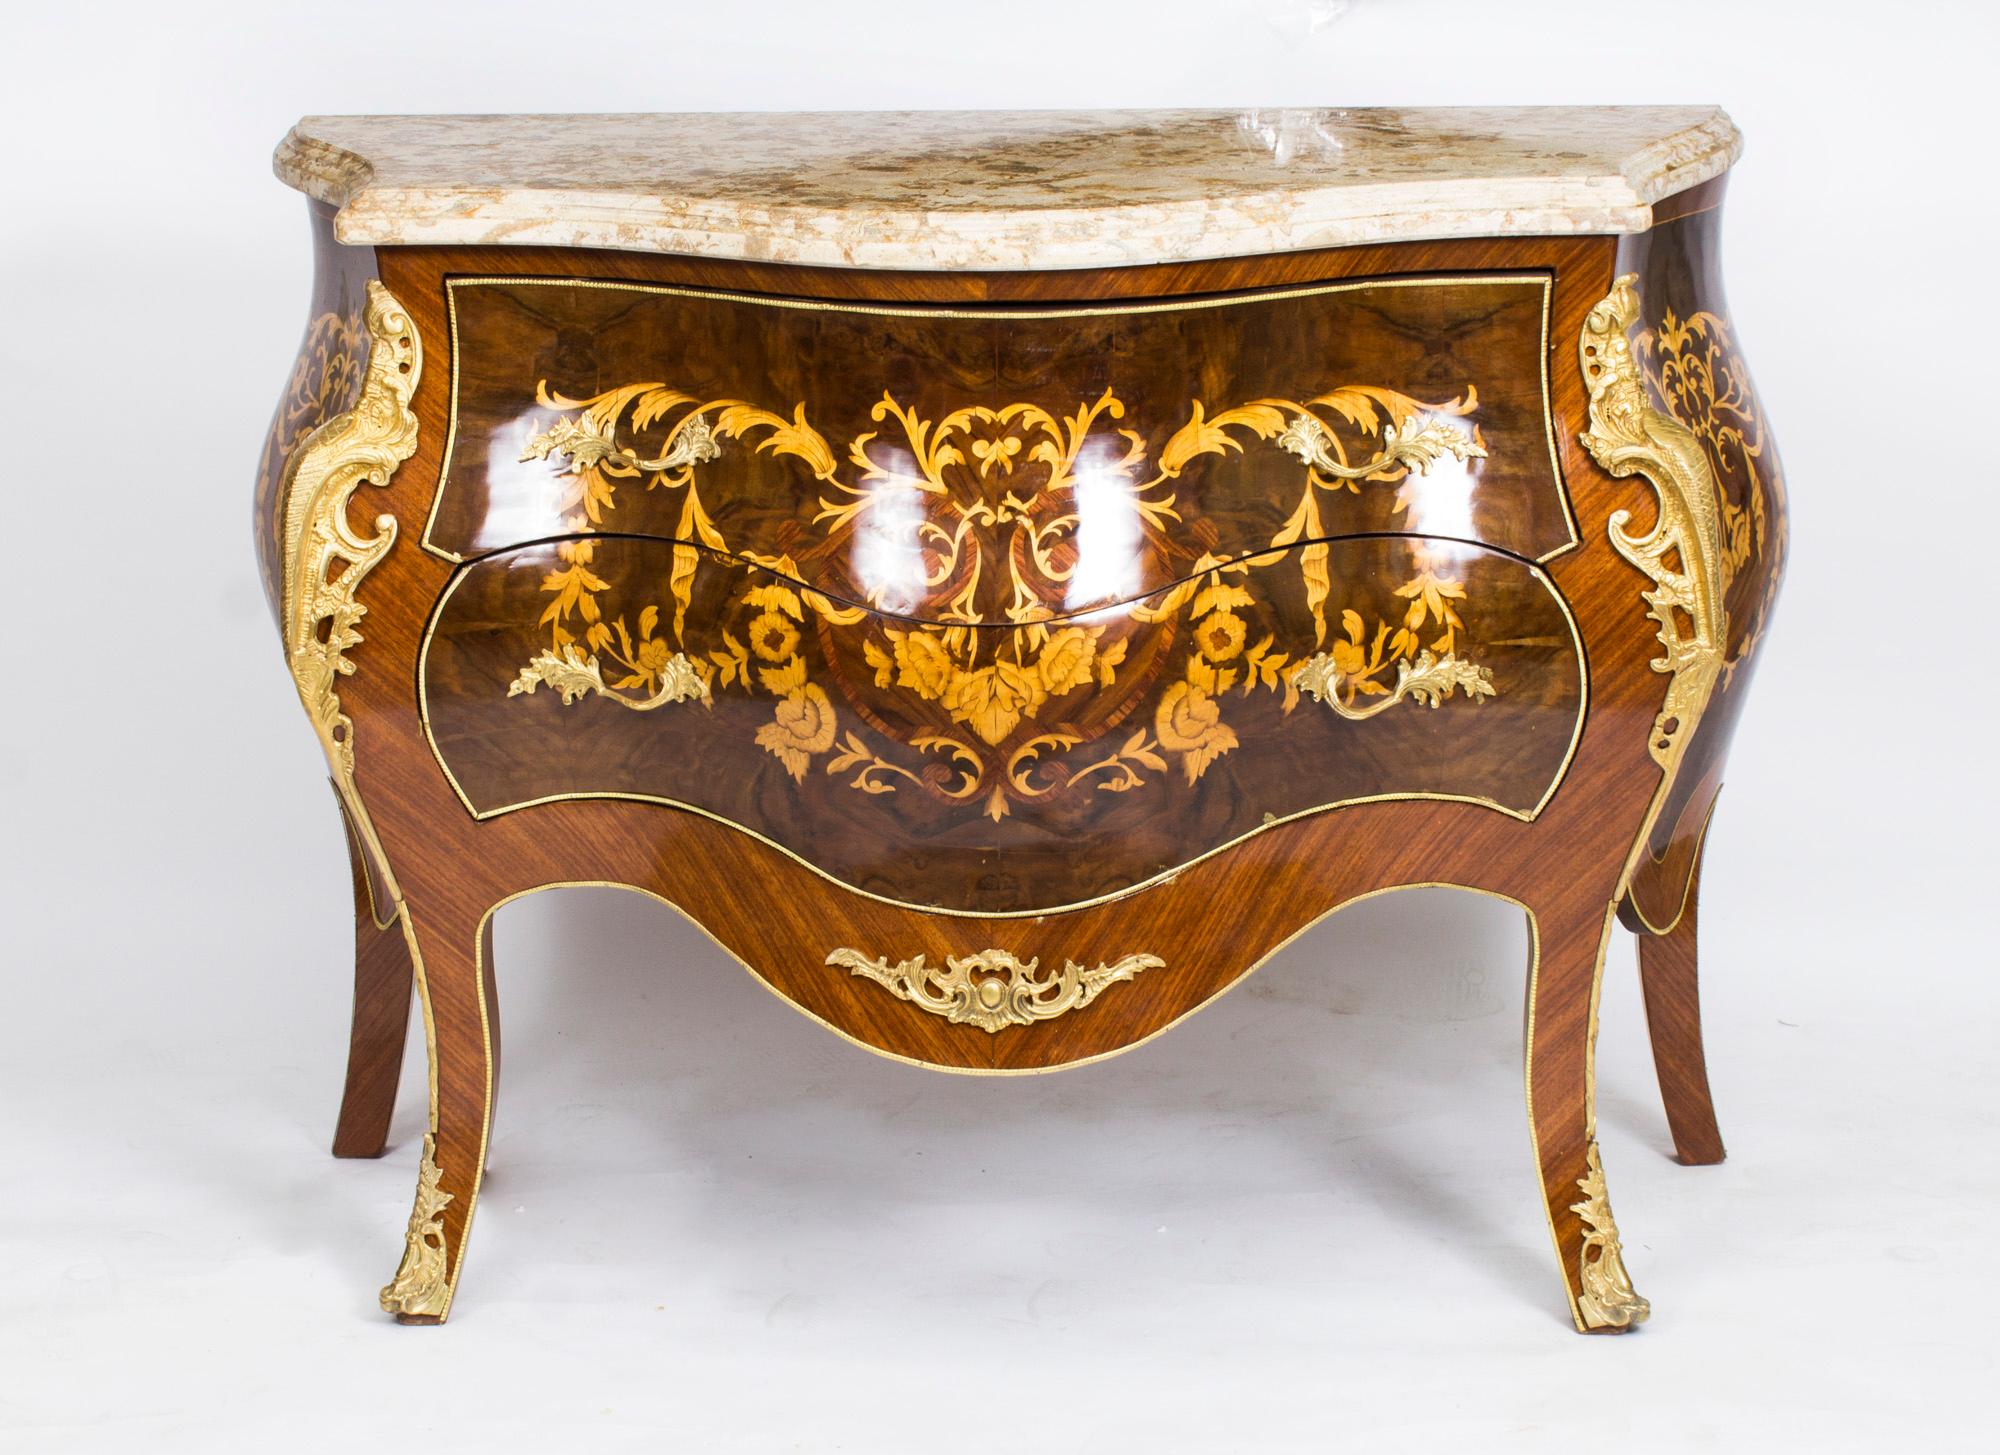 This is a stunning Louis revival marble topped 'bombe' marquetry commode, dating from the last quarter of the 20th century.

This beautiful commode is made from walnut and features exquisite floral marquetry decoration and ormolu mounts. It has two